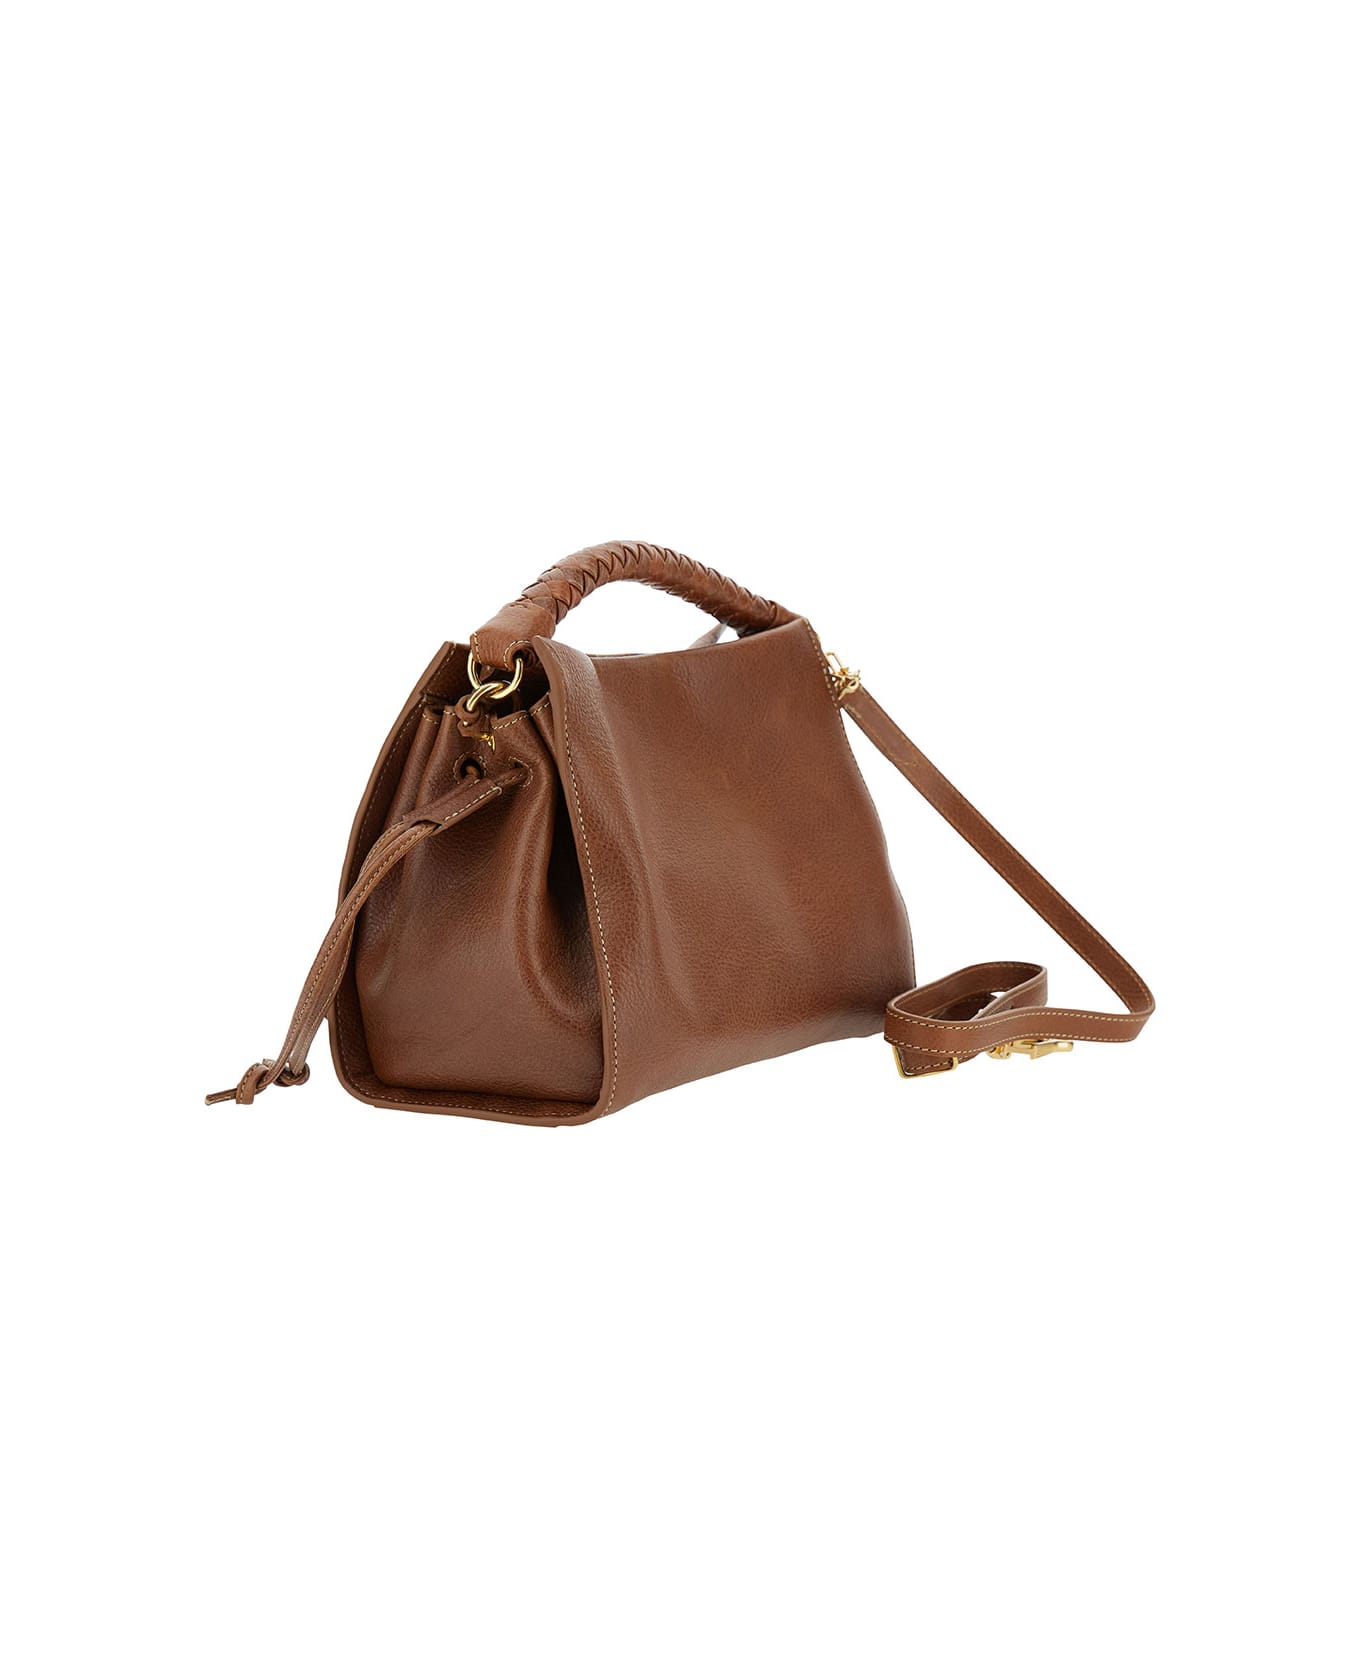 Mulberry 'small Iris' Brown Handbag With Logo Detail In Hammered Leather Woman - Brown